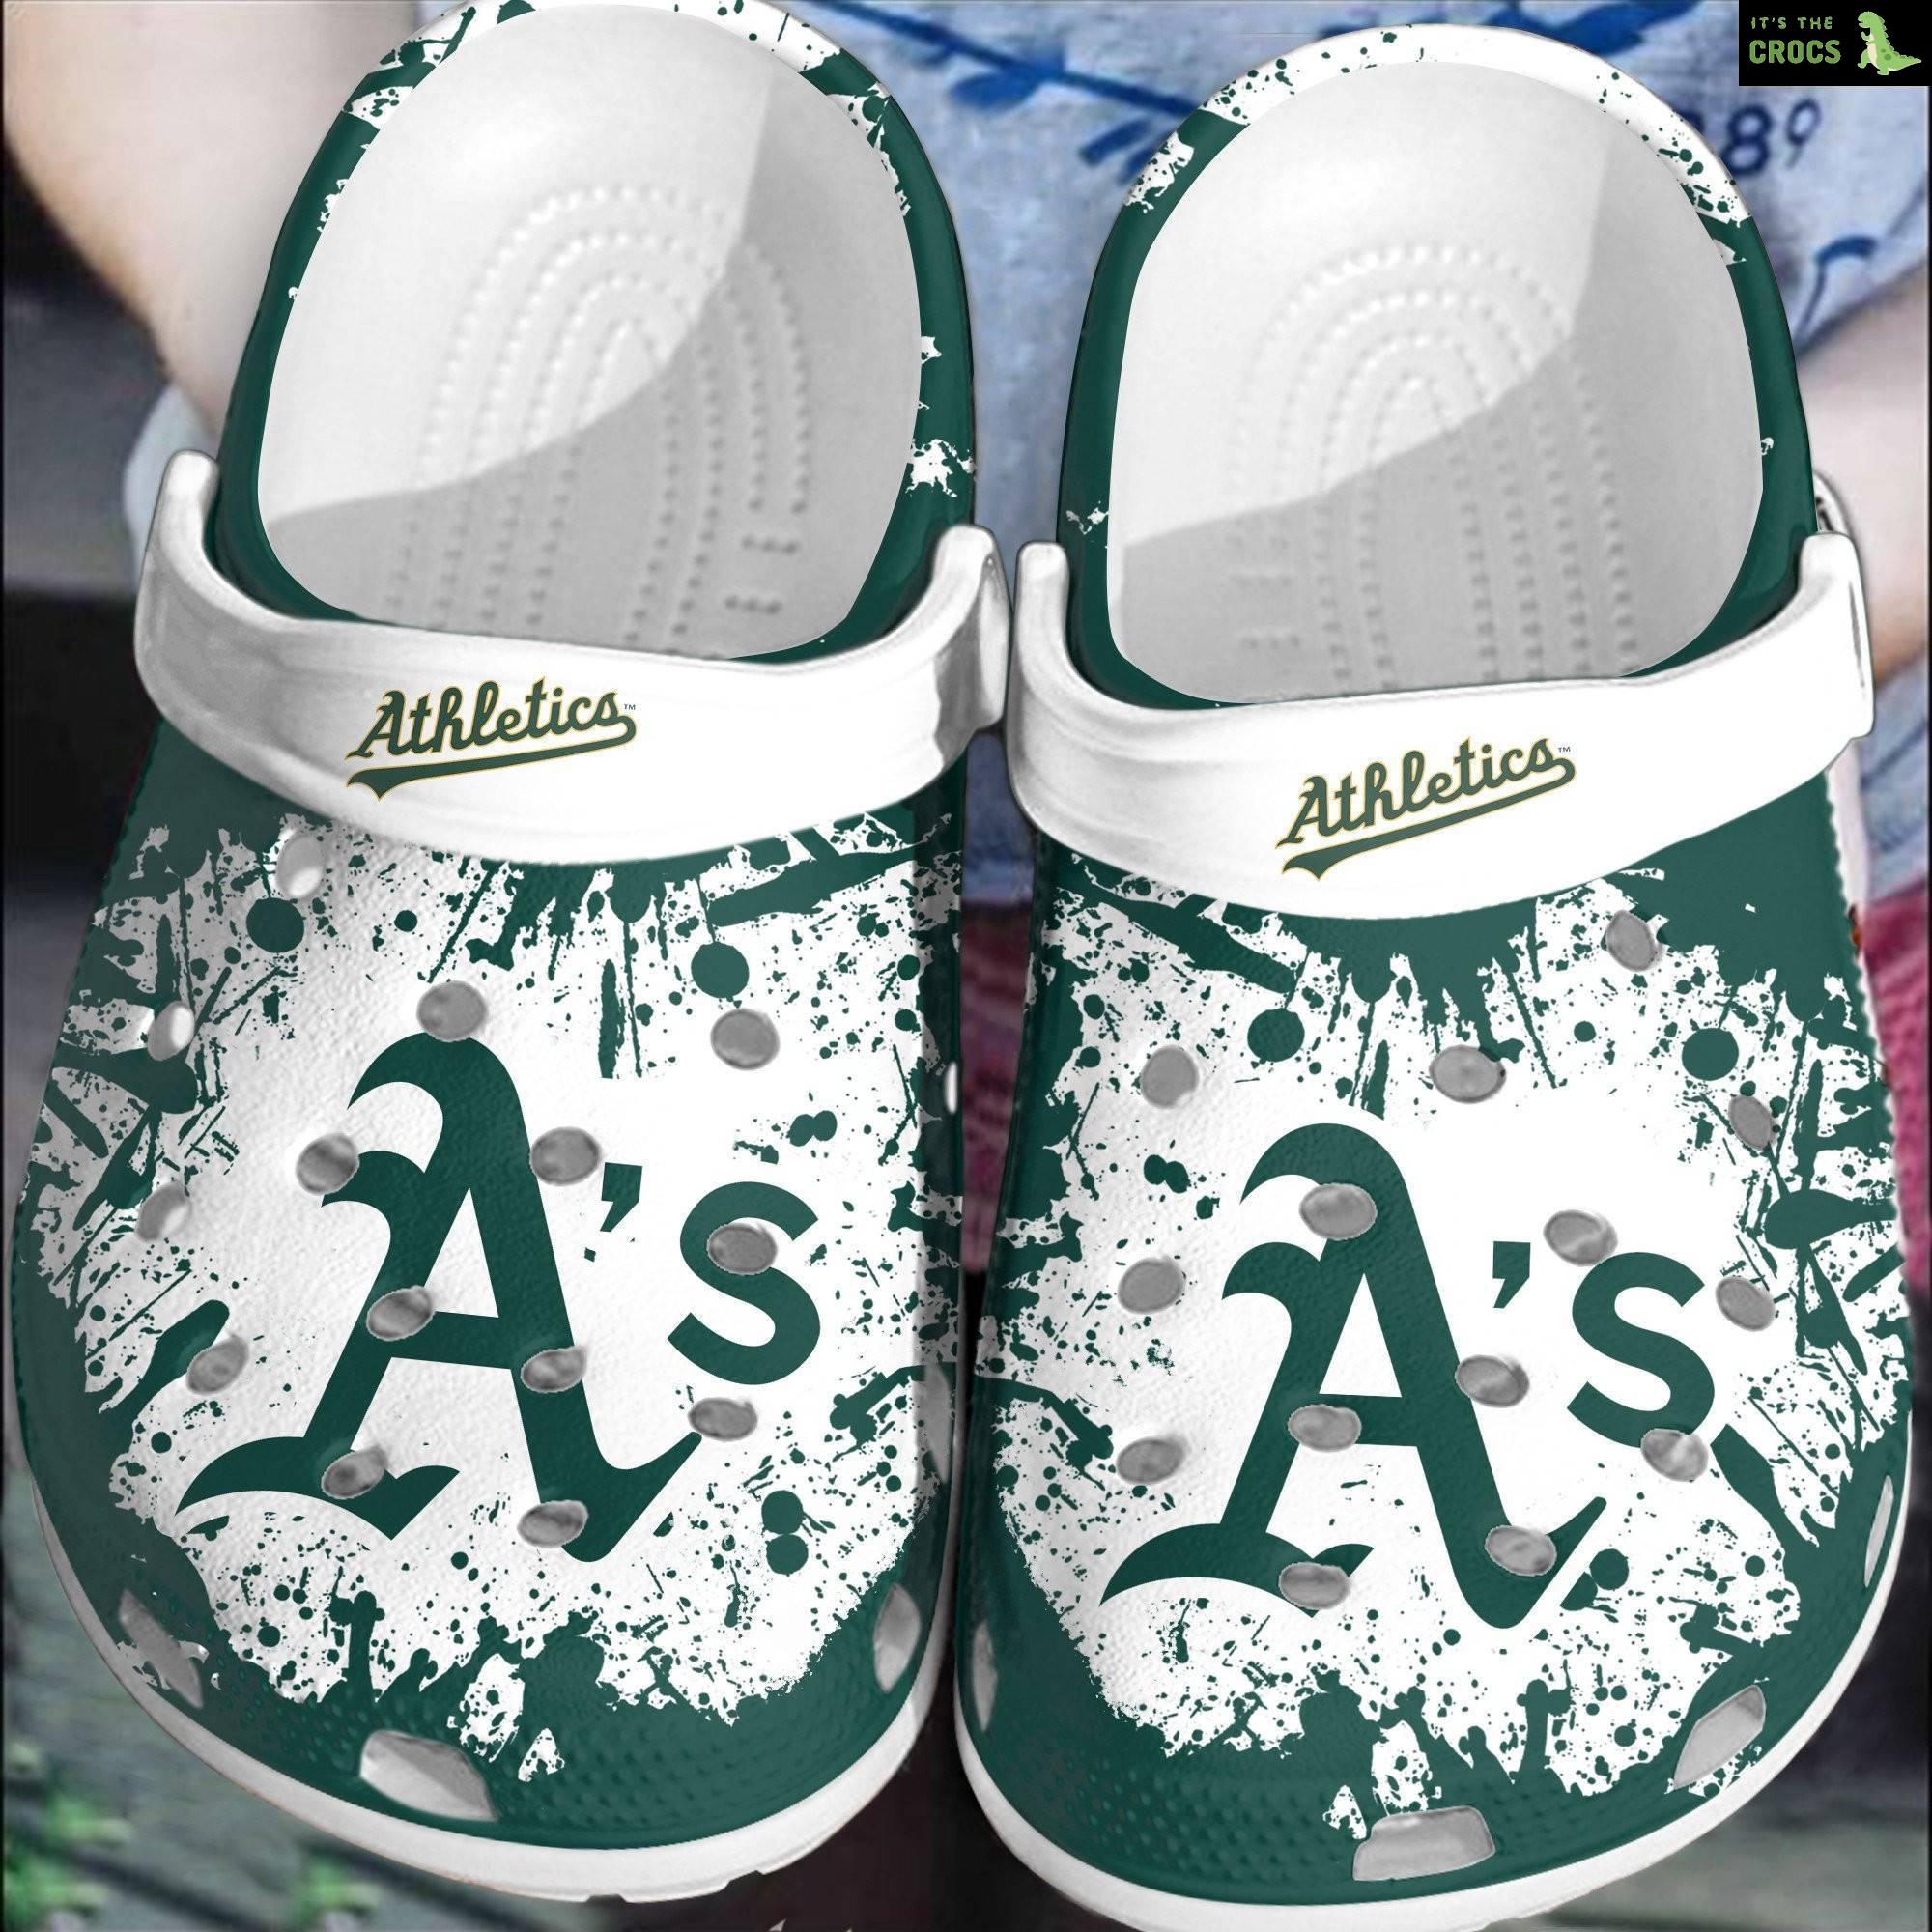 Hot Mlb Team Oakland Athletics Crocs Clog Shoesshoes Trusted Shopping Online In The World